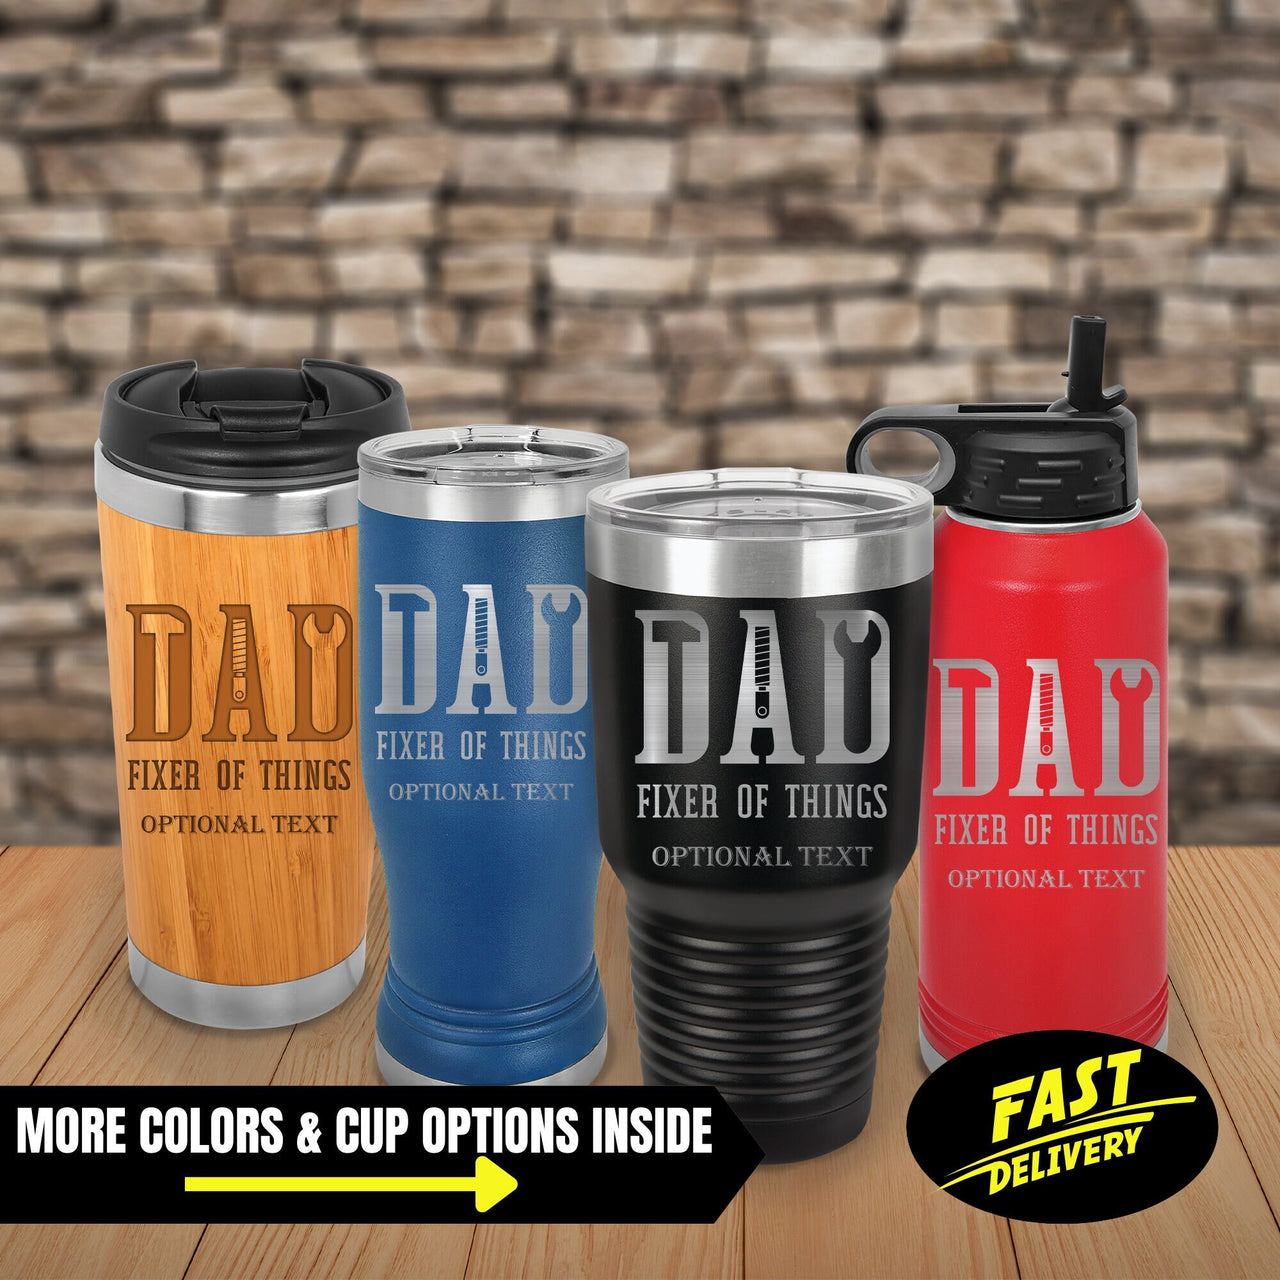 Custom Tumbler Gifts for Dad, Dad Fixer Of Things Tumbler, Personalized Gift for Handyman Dad, Gift for Papa, Grandpa, Coffee Cup with lid